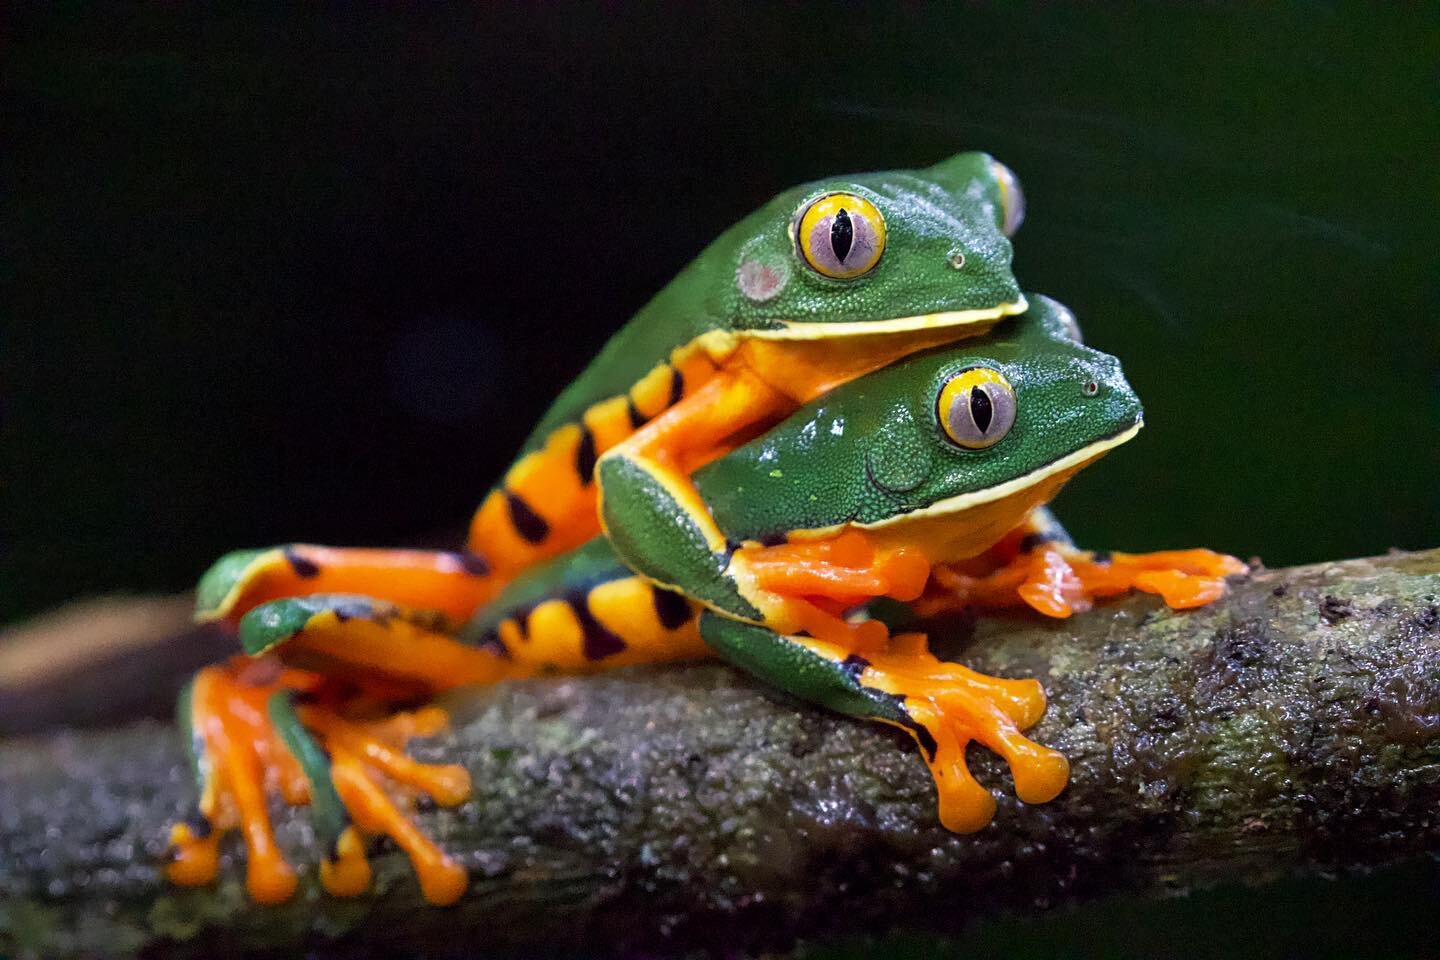 Absolutely splendid sex here in the Panamanian rainforests. Well, kinda. Frogs don&rsquo;t exactly do it, like we do. These two Splendid Leaf Frogs are locked in what&rsquo;s known as amplexus, a position in which the male mounts the female, grasping